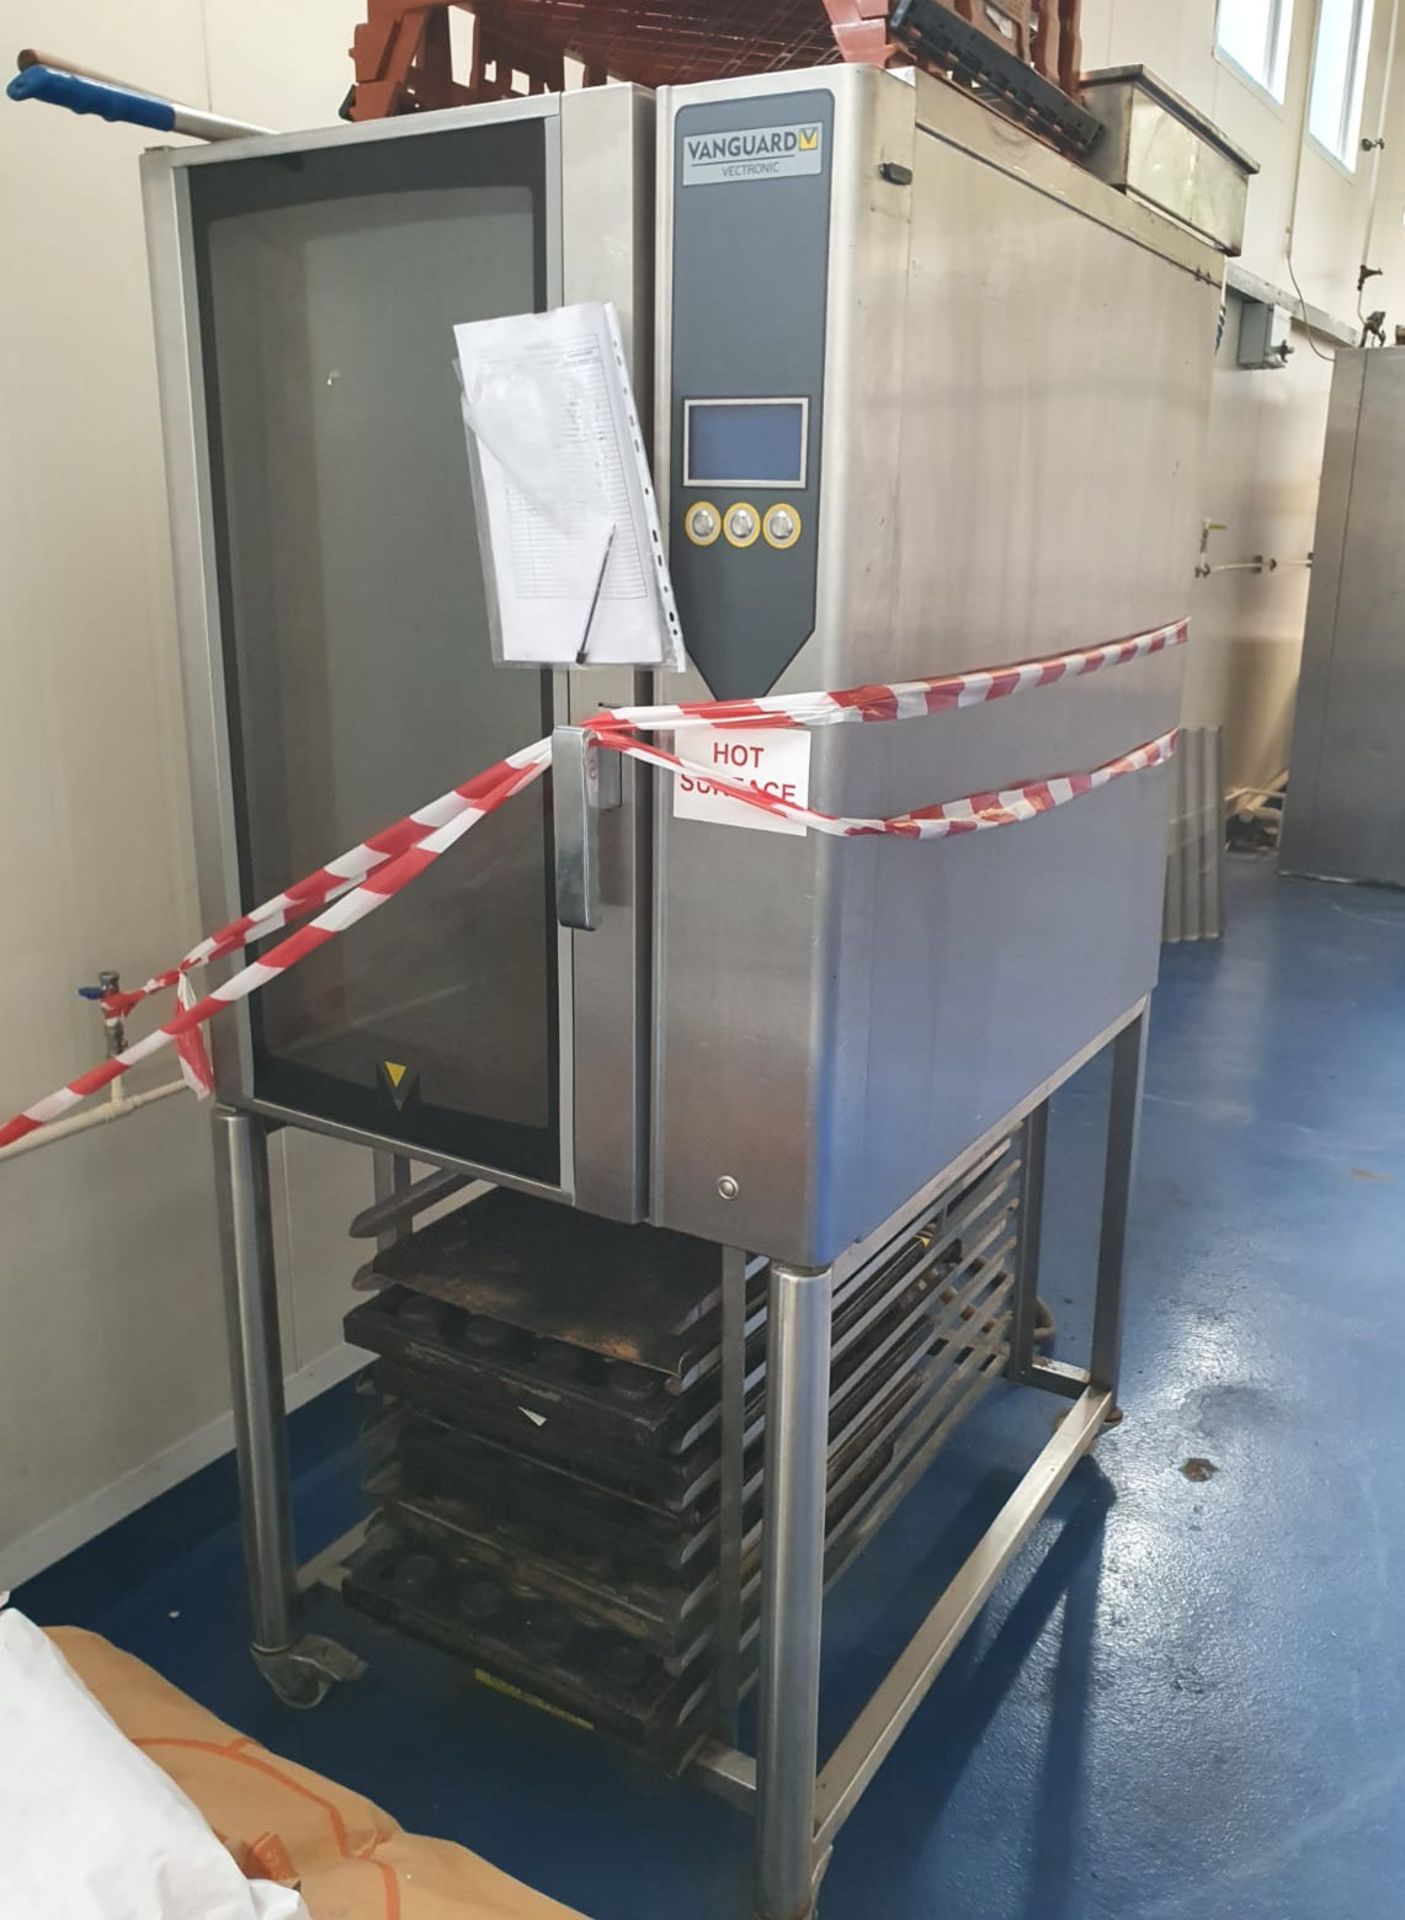 1 x Millers Vanguard Vectronic Bakery Oven - Type 958M - 3 Phase - CL529 - Location: Wakefield WF2